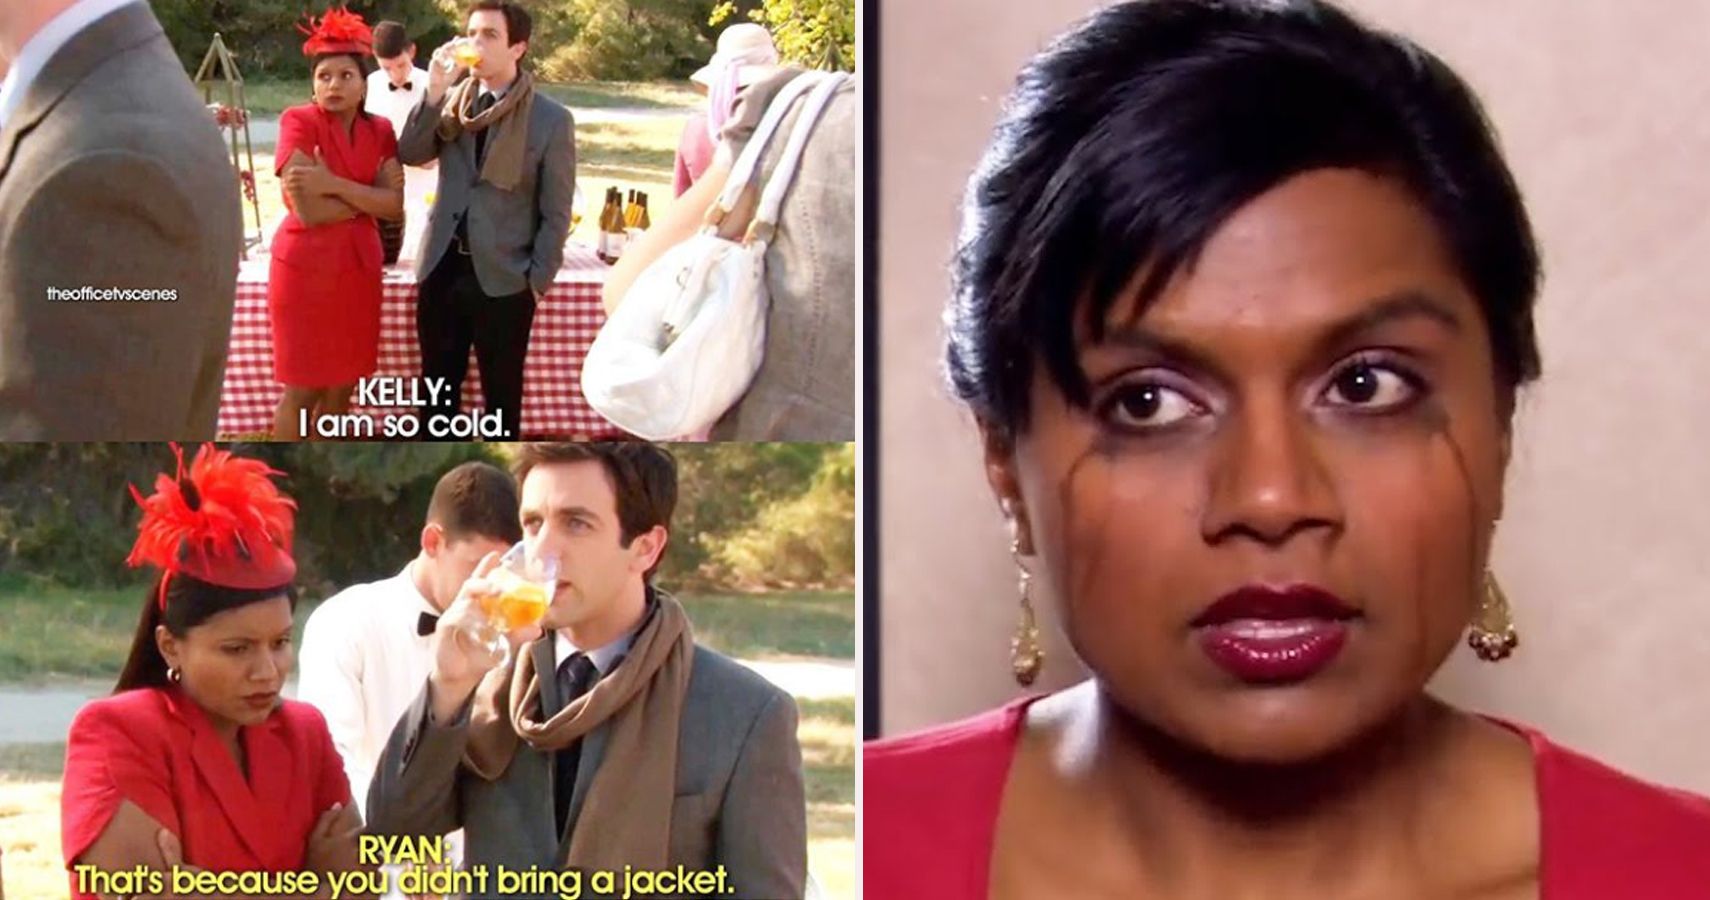 The Office 10 Memes Kelly Kapoor Fans Will Love